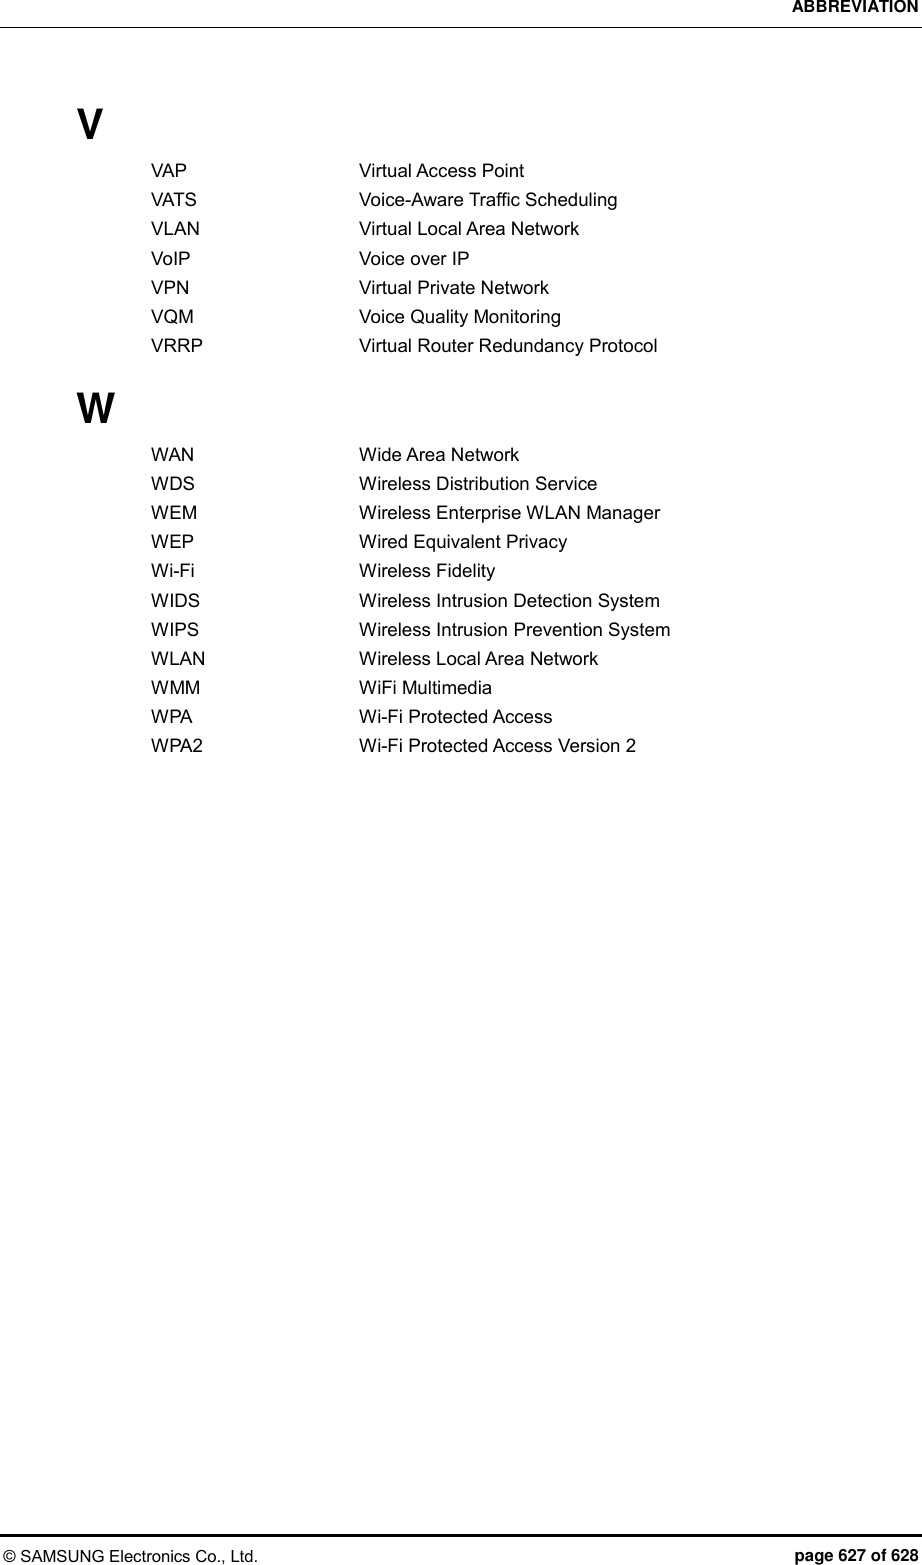 ABBREVIATION © SAMSUNG Electronics Co., Ltd.  page 627 of 628 V VAP    Virtual Access Point VATS    Voice-Aware Traffic Scheduling VLAN    Virtual Local Area Network VoIP    Voice over IP VPN    Virtual Private Network VQM    Voice Quality Monitoring VRRP    Virtual Router Redundancy Protocol  W WAN    Wide Area Network WDS    Wireless Distribution Service WEM    Wireless Enterprise WLAN Manager WEP    Wired Equivalent Privacy Wi-Fi    Wireless Fidelity WIDS    Wireless Intrusion Detection System WIPS    Wireless Intrusion Prevention System WLAN    Wireless Local Area Network WMM    WiFi Multimedia WPA    Wi-Fi Protected Access WPA2    Wi-Fi Protected Access Version 2    